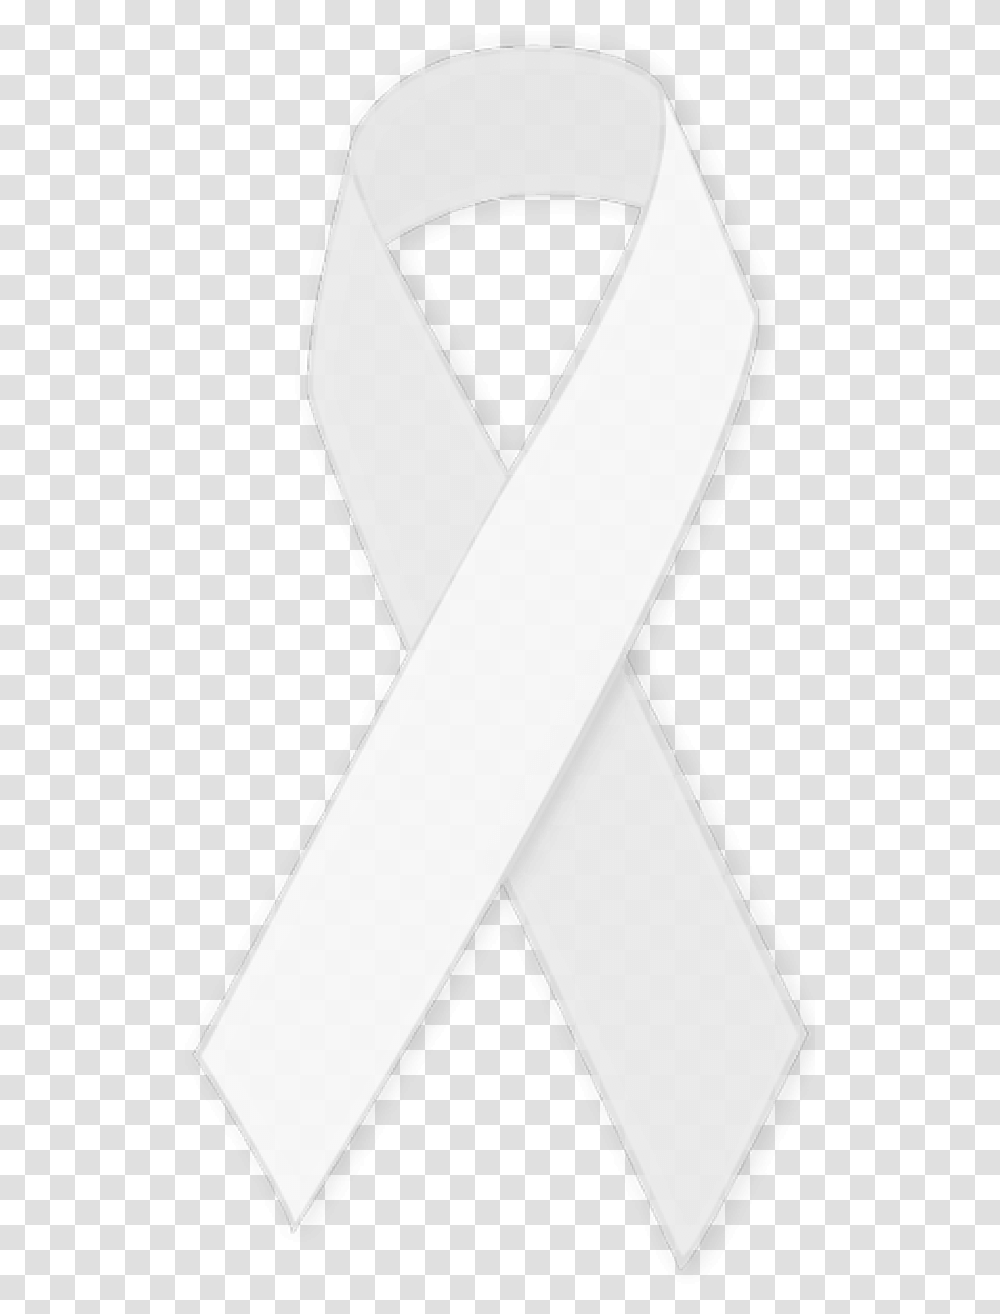 Download Lung Cancer Ribbon Invisible Disability Awareness Ribbon, Accessories, Accessory, Belt, Tie Transparent Png